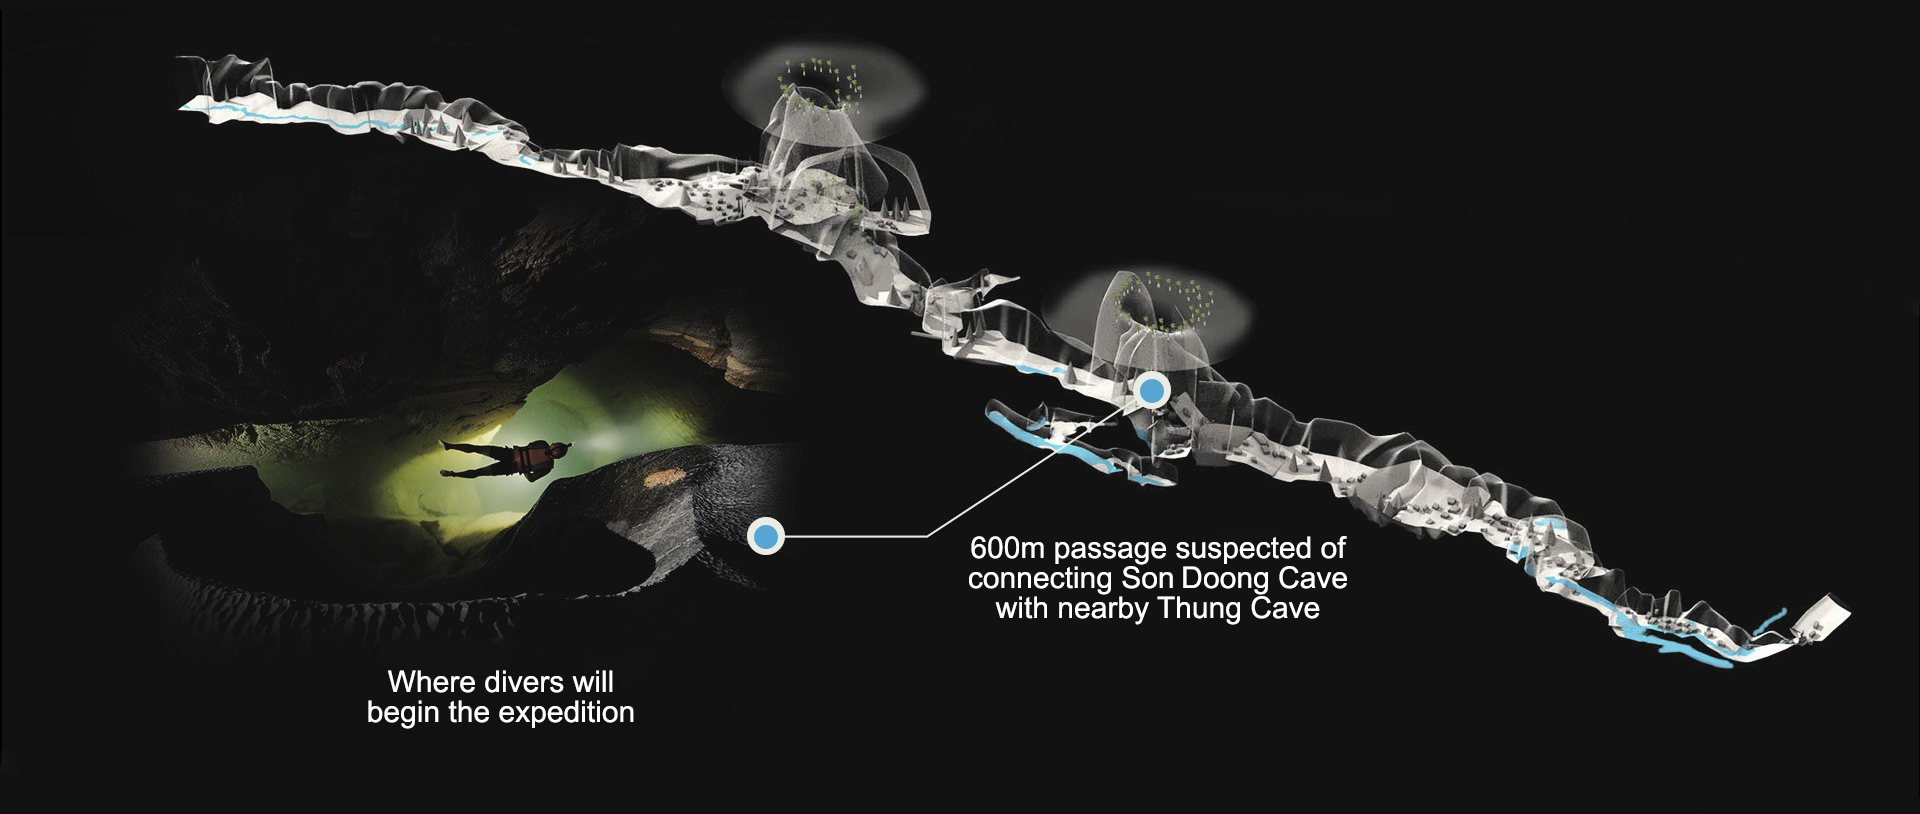 A map of the underwater passage inside Son Doong Cave where caving experts plan to explore in April 2019. Graphic: Tuoi Tre